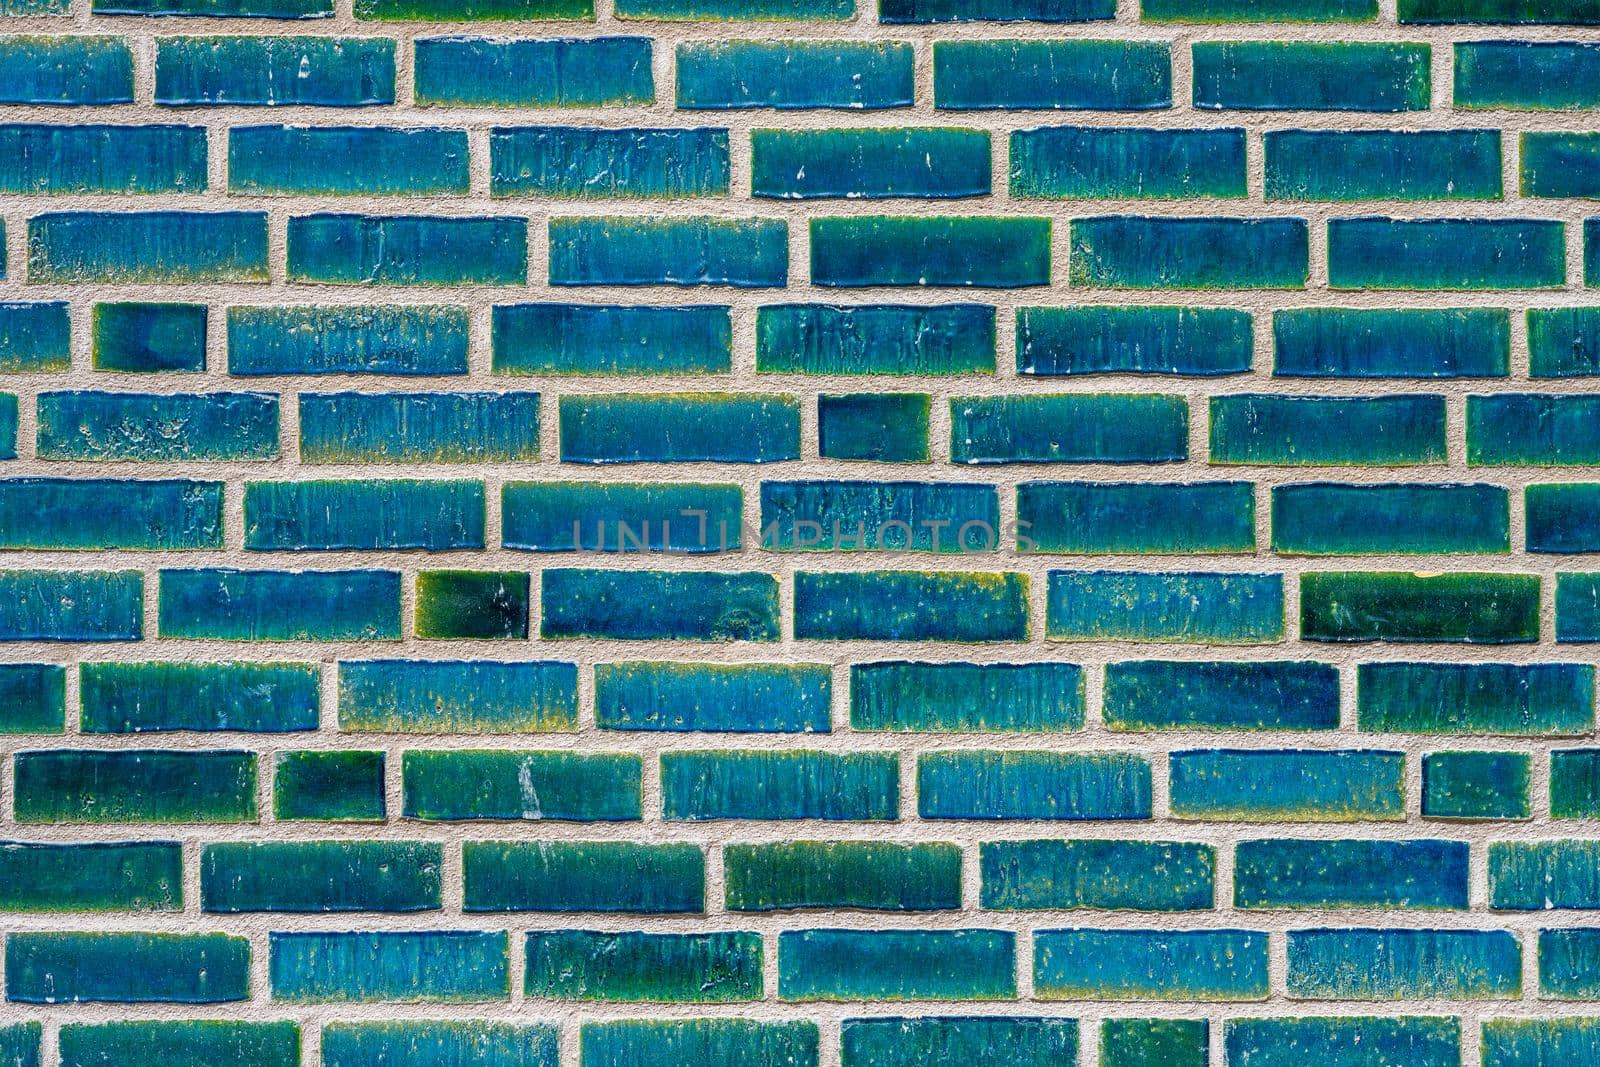 Background from a wall made of turquoise bricks